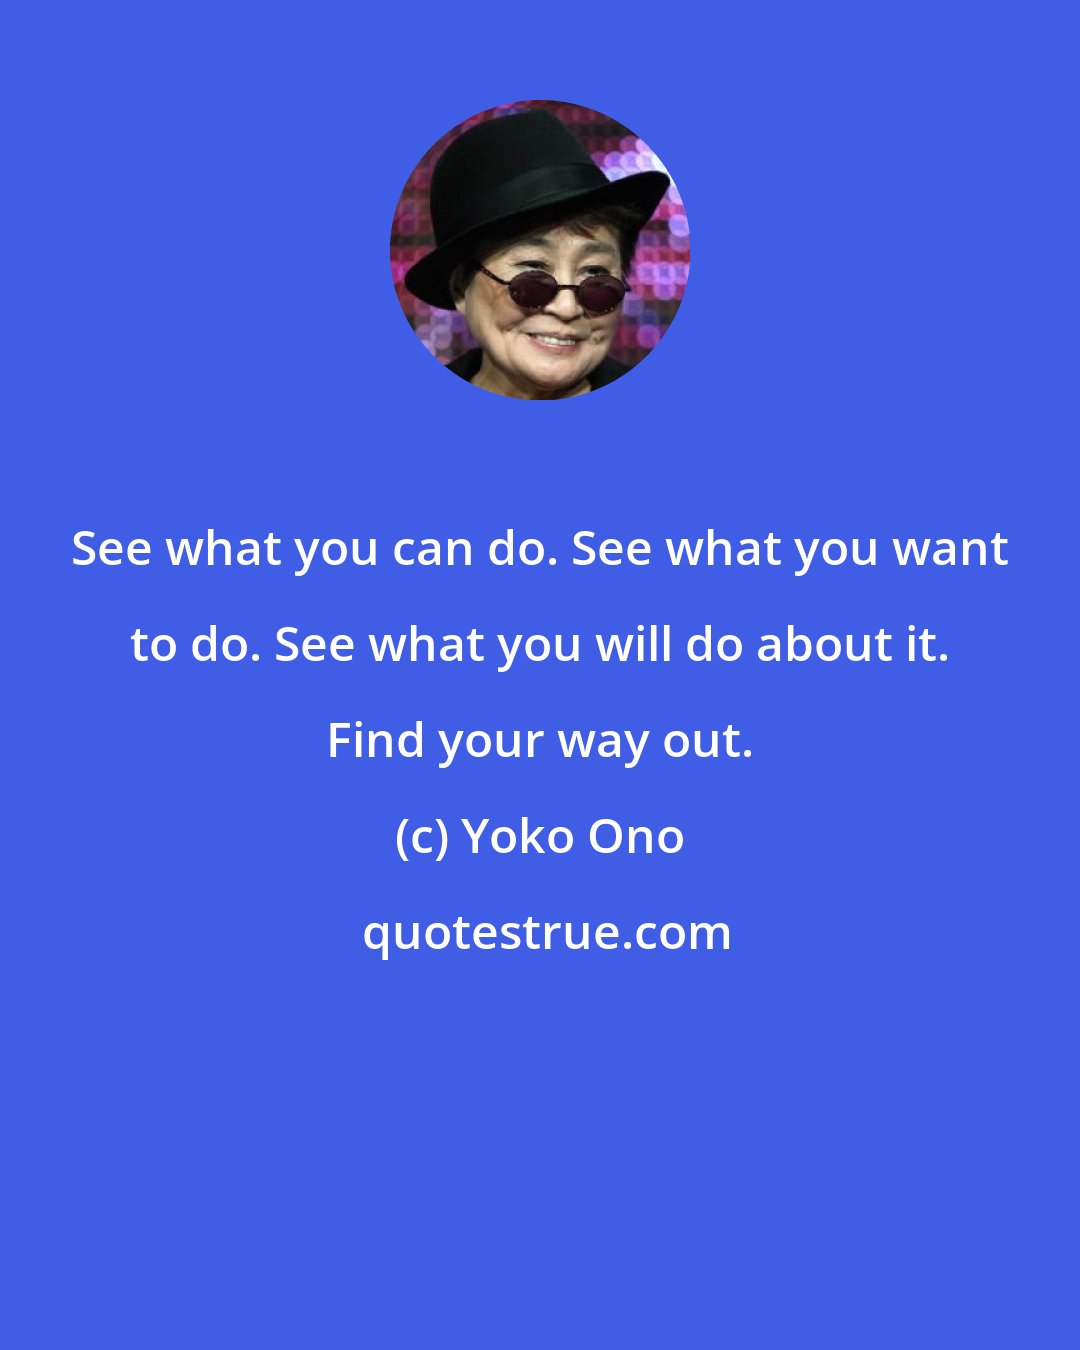 Yoko Ono: See what you can do. See what you want to do. See what you will do about it. Find your way out.